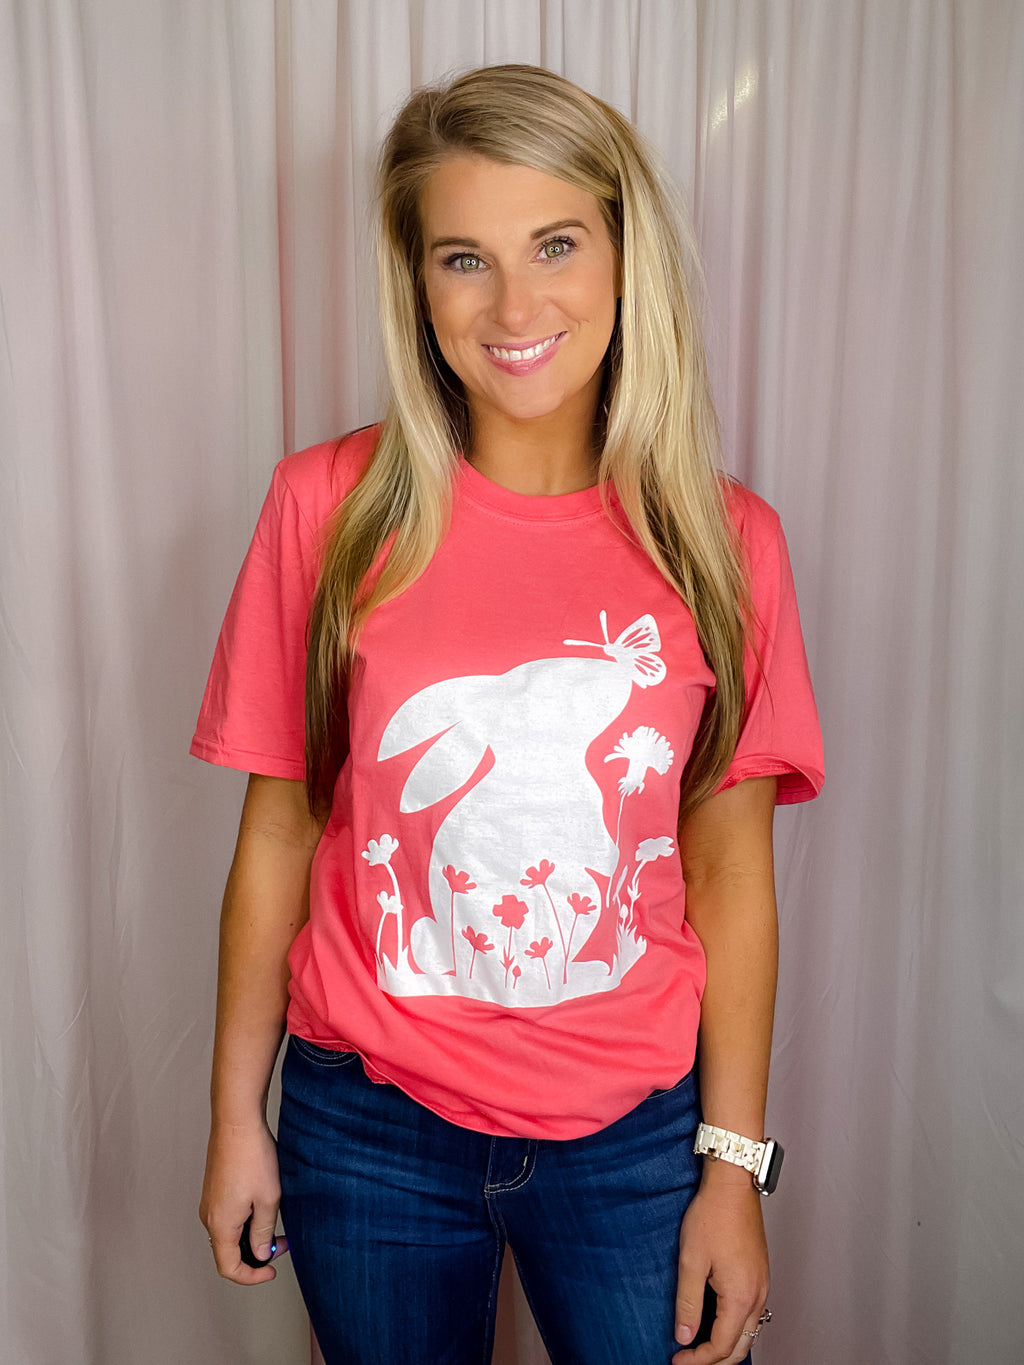 This Bunny Rabbit Tee features a trendy and adorable bunny rabbit design with warm spring vibes, perfect for Easter. It's made from lightweight material, with classic short sleeves and a round neckline, and a unisex fit for everyone from S-3XL.-coral